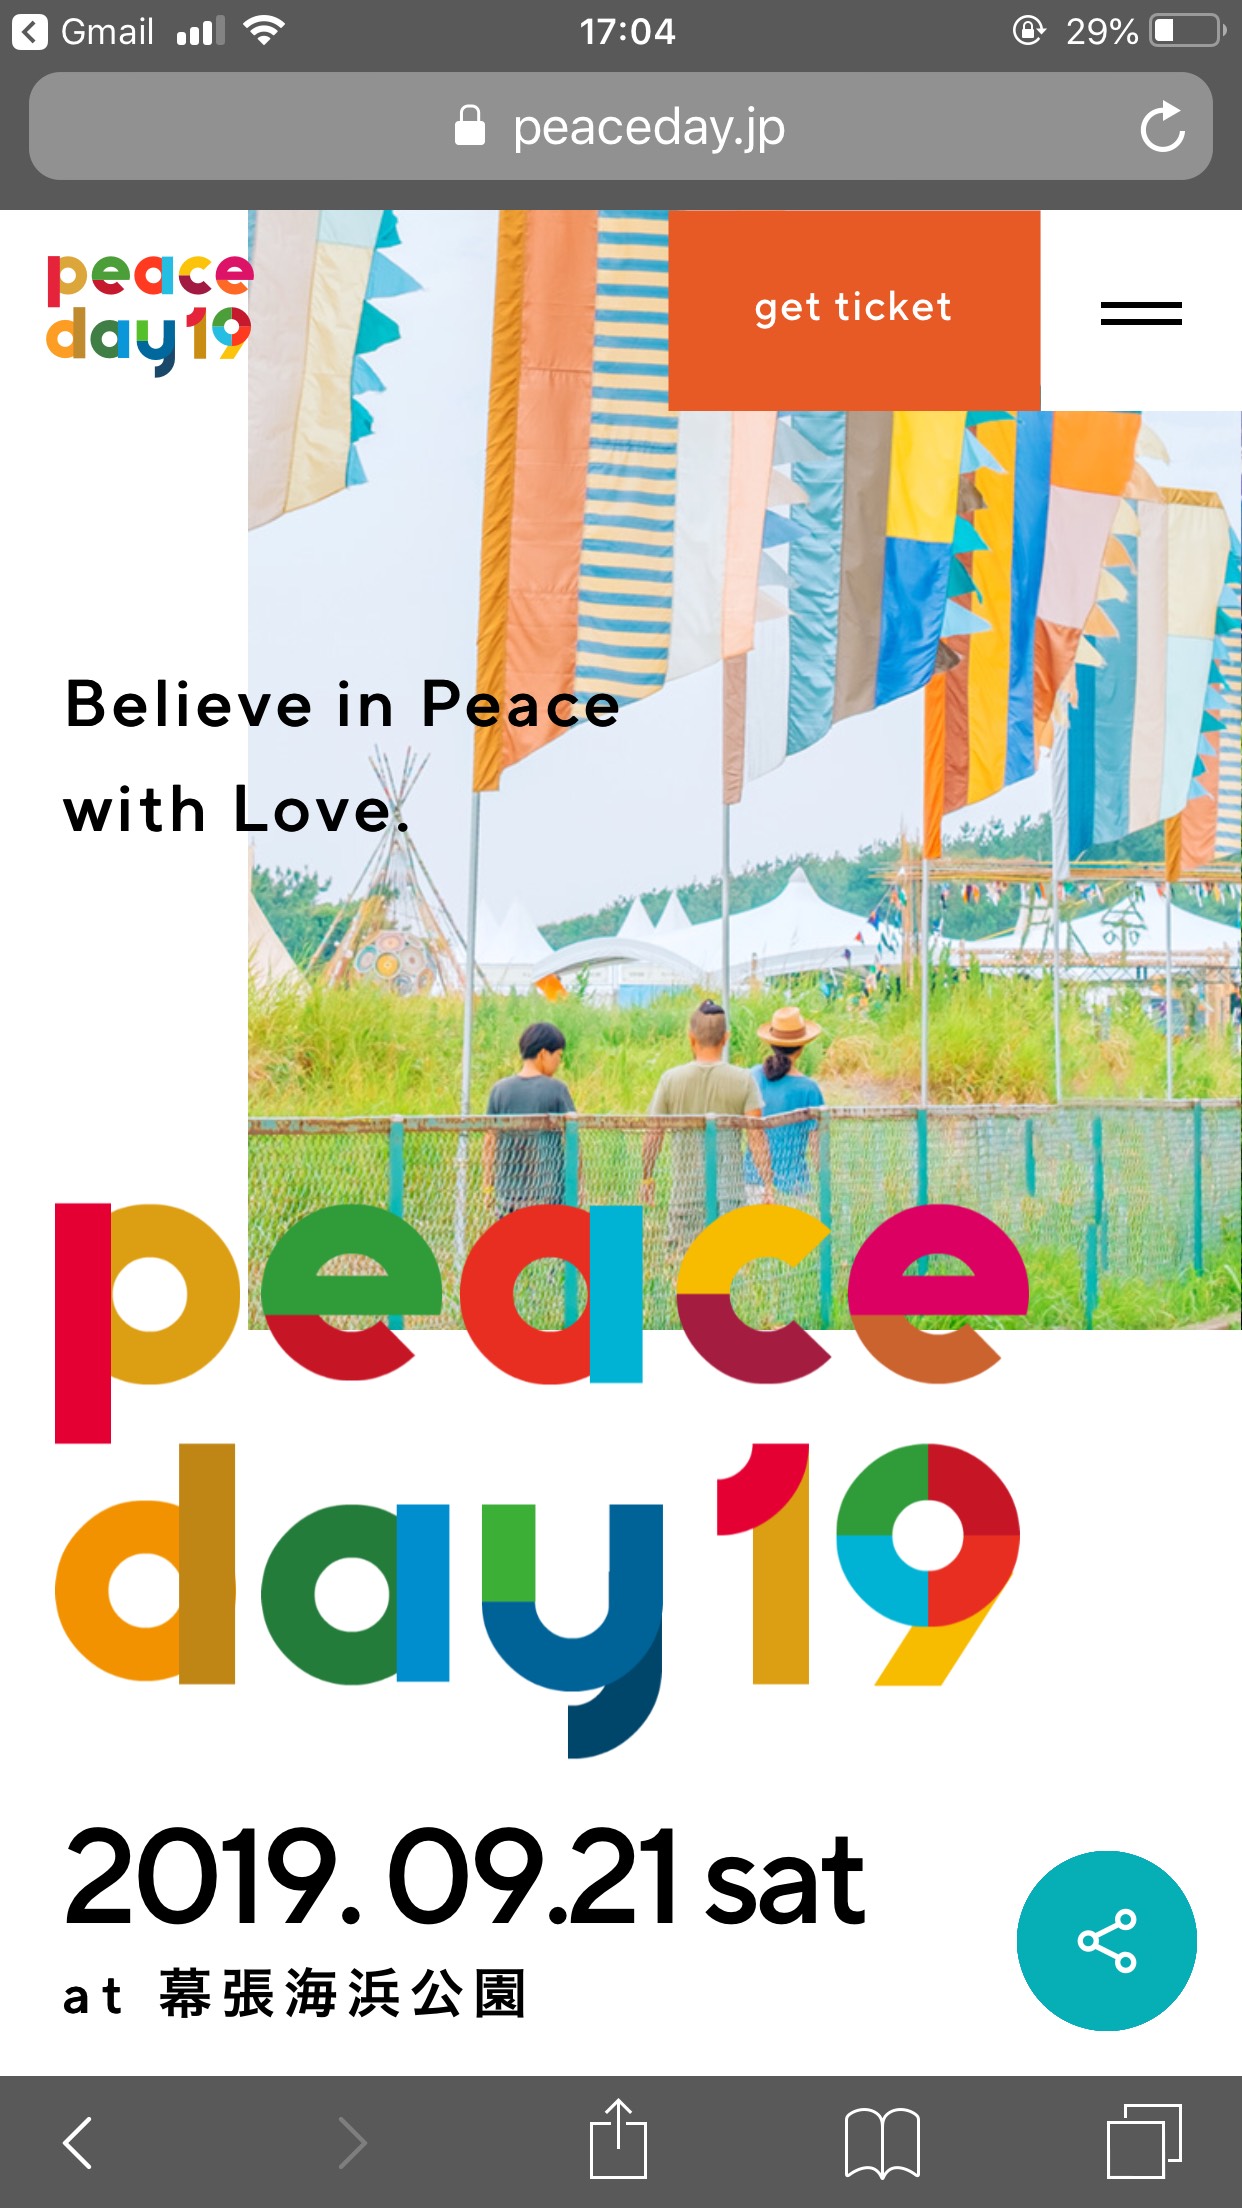 PEACE DAY19